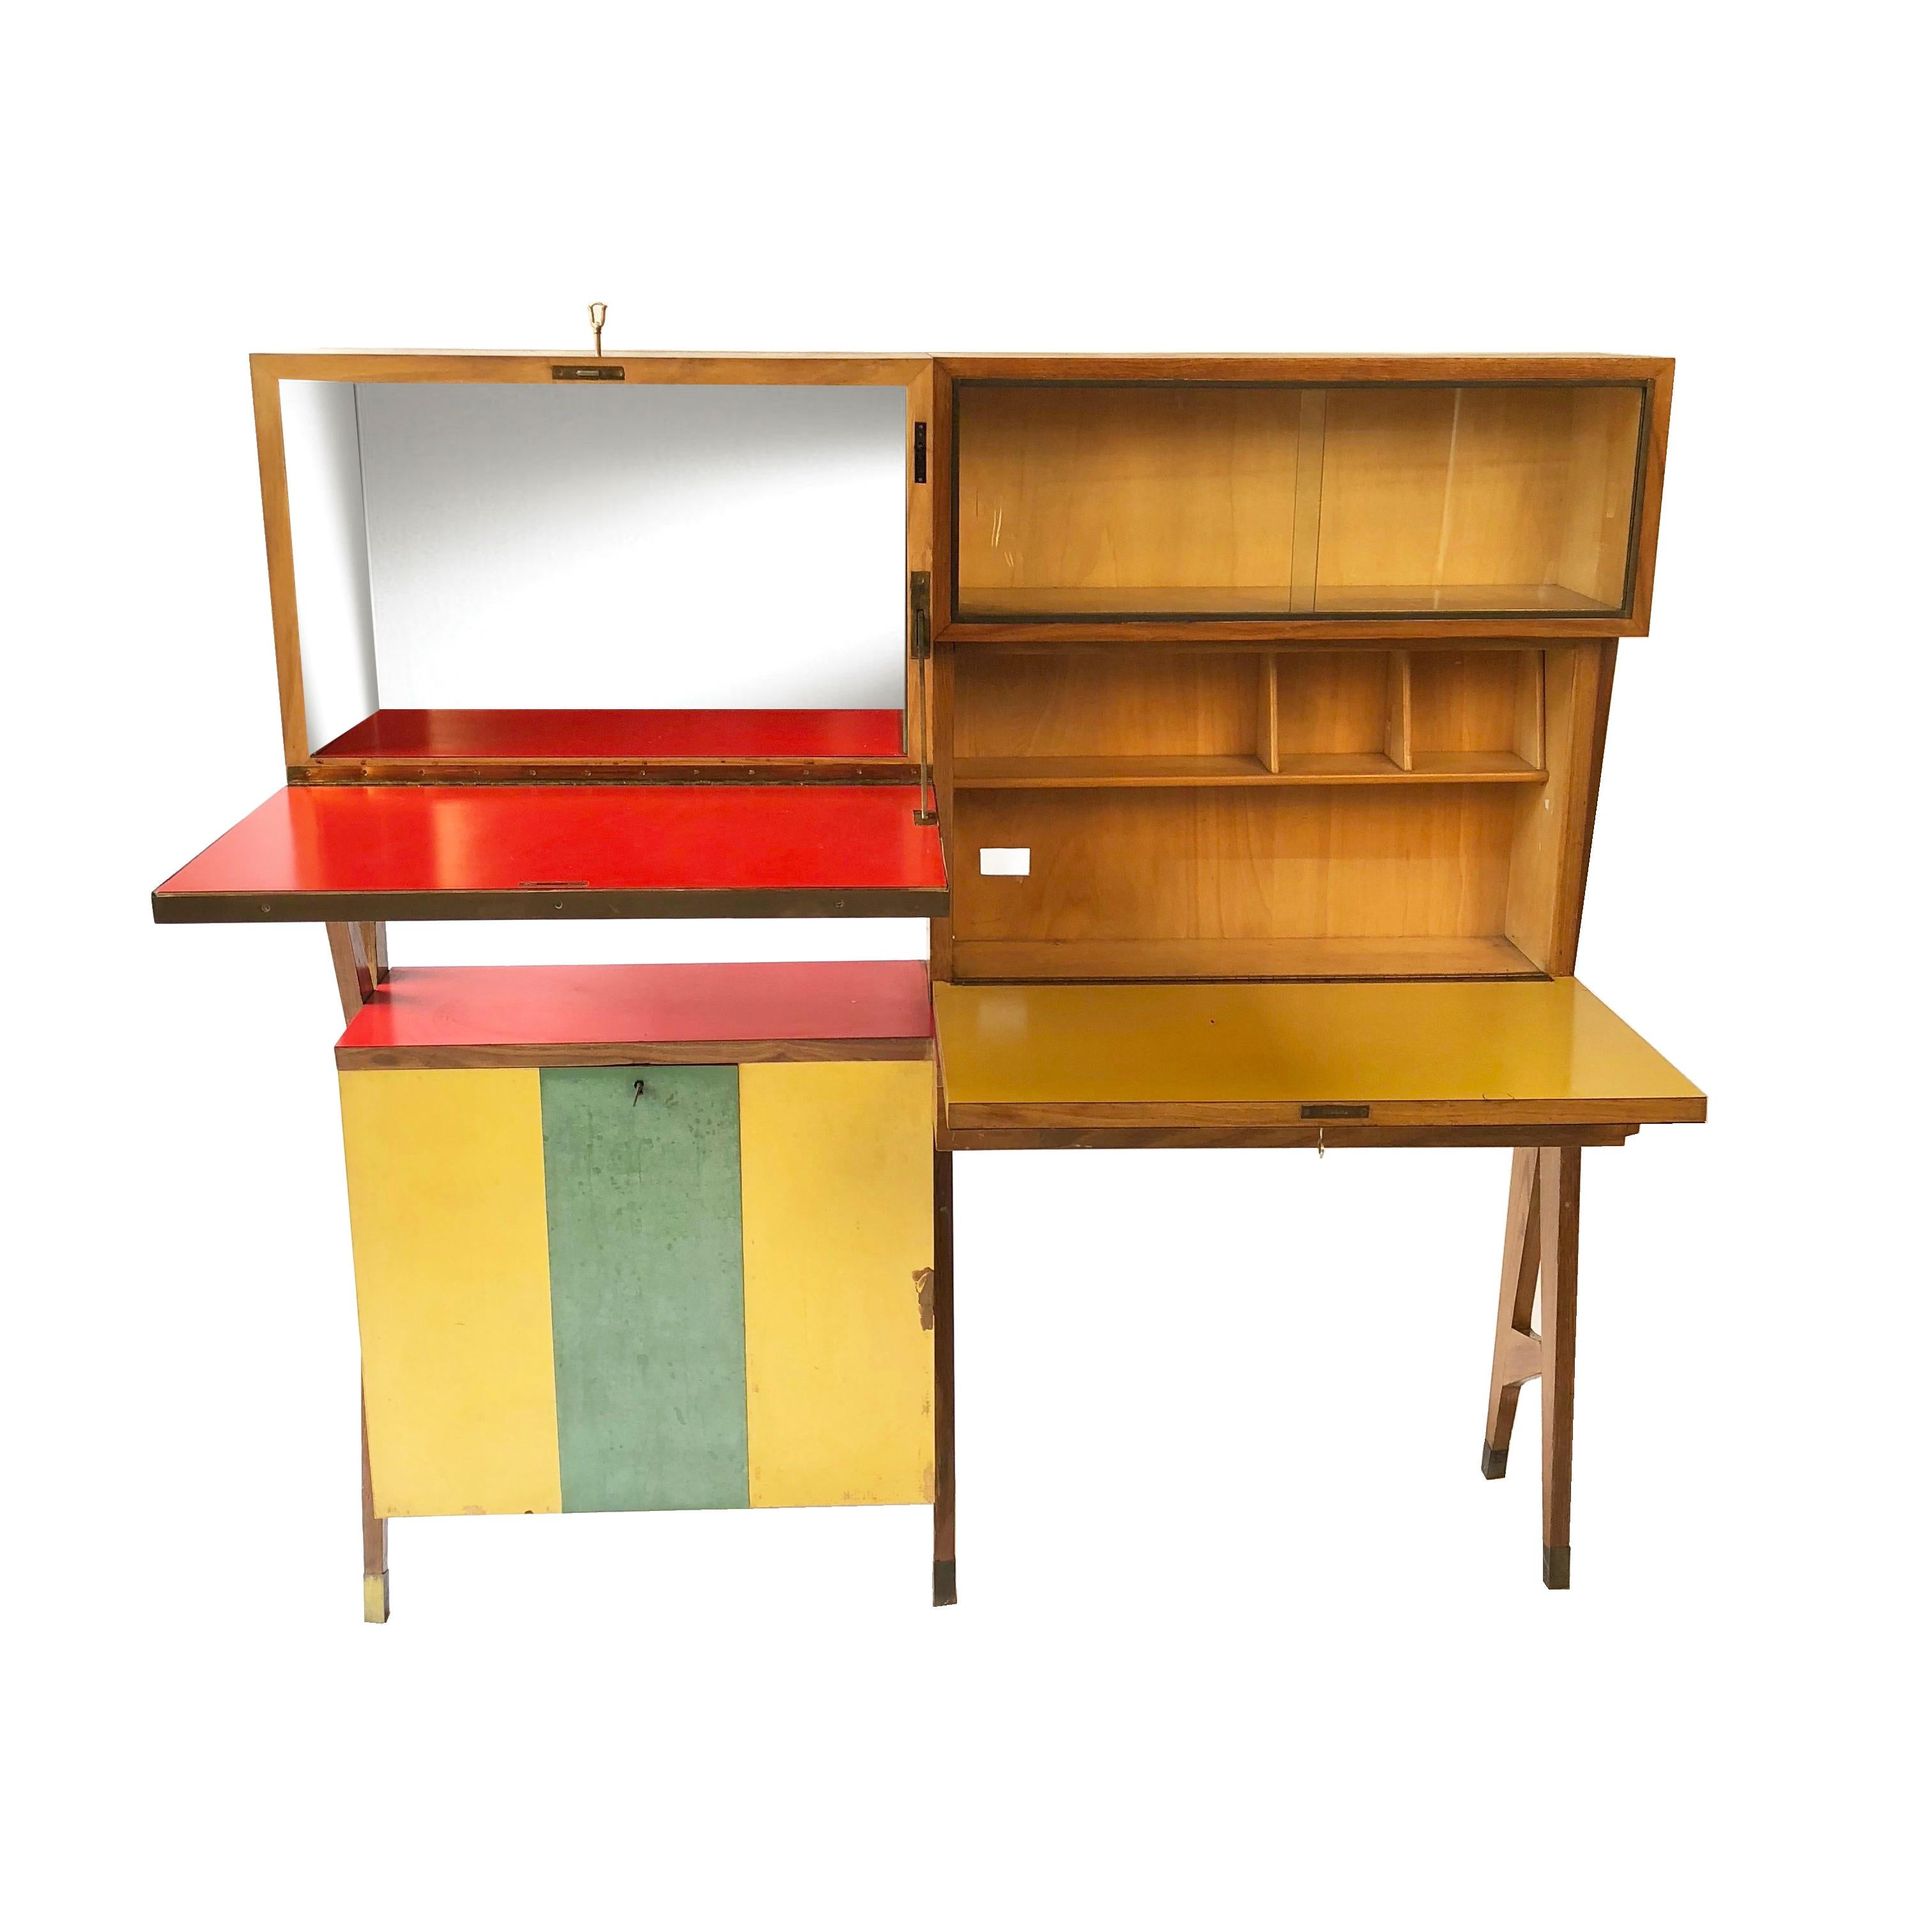 Particular dry bar cabinet in wood covered with formica, Italy, circa 1950.
The left upper cabin contains a mirror which lights up at the opening.
The left lower cabin is composed by a lockable door which reveals two shelves.
The right upper part